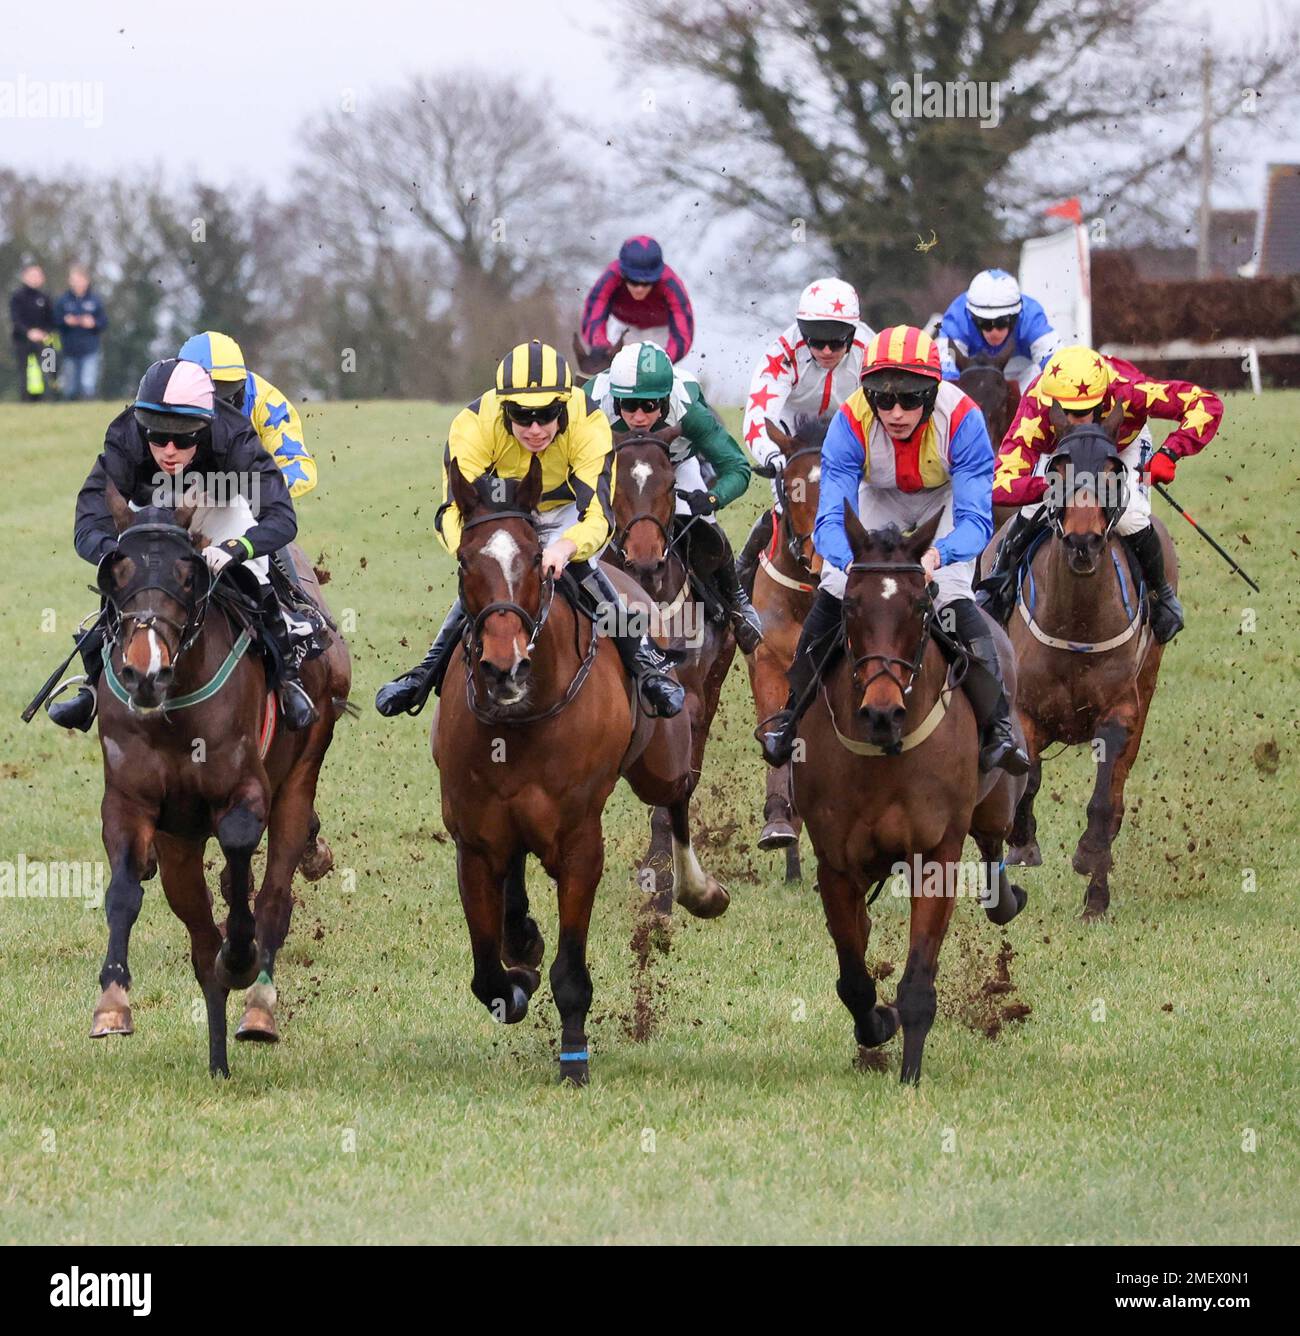 Down Royal Racecourse, Lisburn, Northern Ireland, UK. 24 Jan 2023. Aspall Handicap Chase. National Hunt racing January 2023. Race won by Wee Small Hours (11 – red/yellow helmet) ridden by  jockey Dillon Maxwell, trainer M M Rice. Front three (l-r) Monoxide, Garri Phaidin, and Wee Small Hours. Credit: CAZIMB/Alamy Live News. Stock Photo